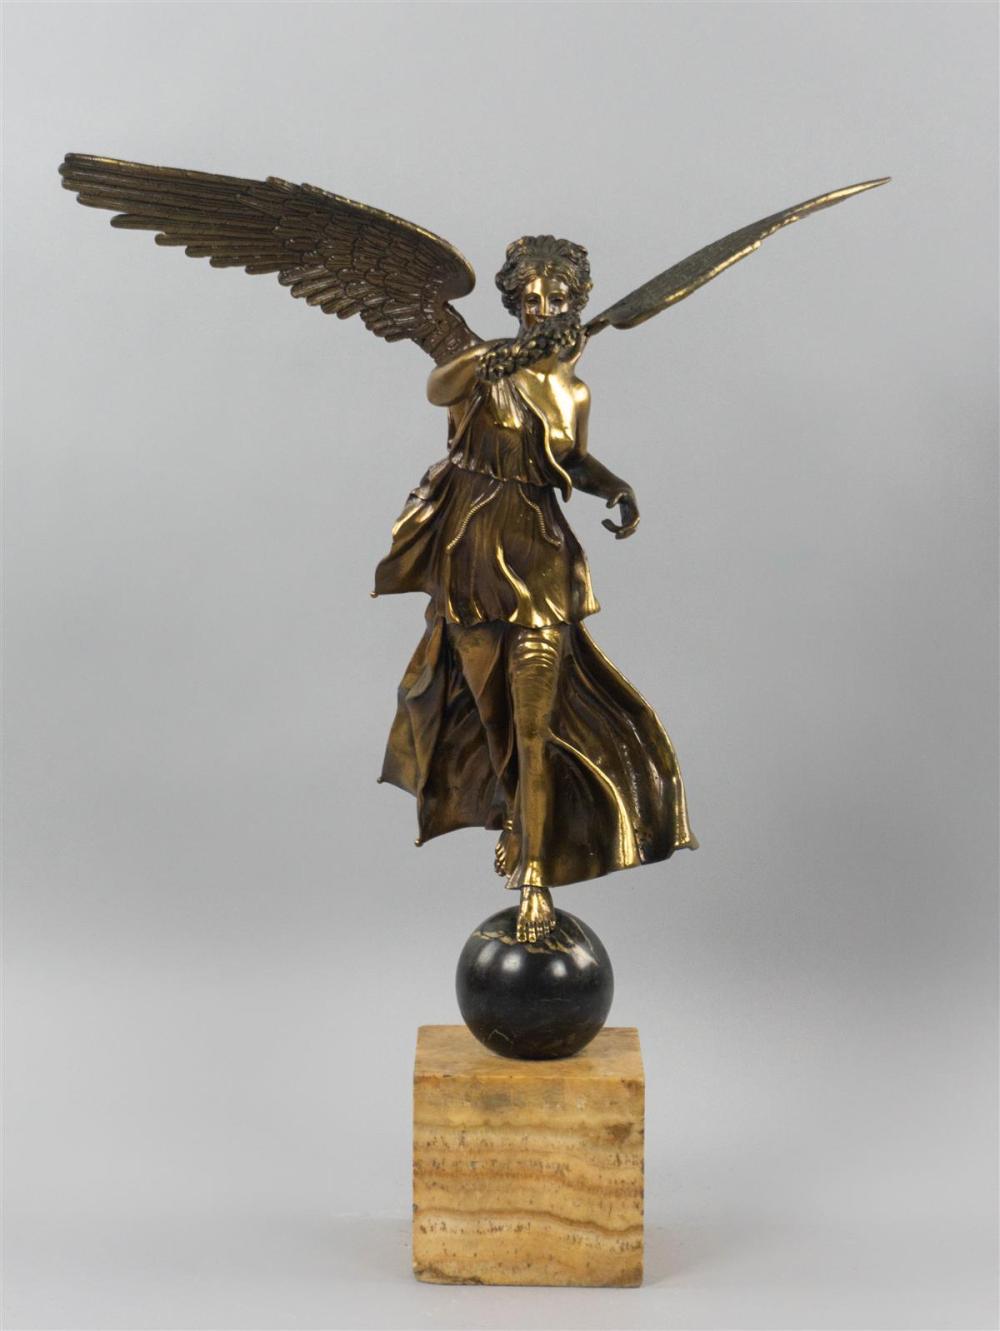 GILT-BRONZE OR BRASS FIGURE OF WINGED